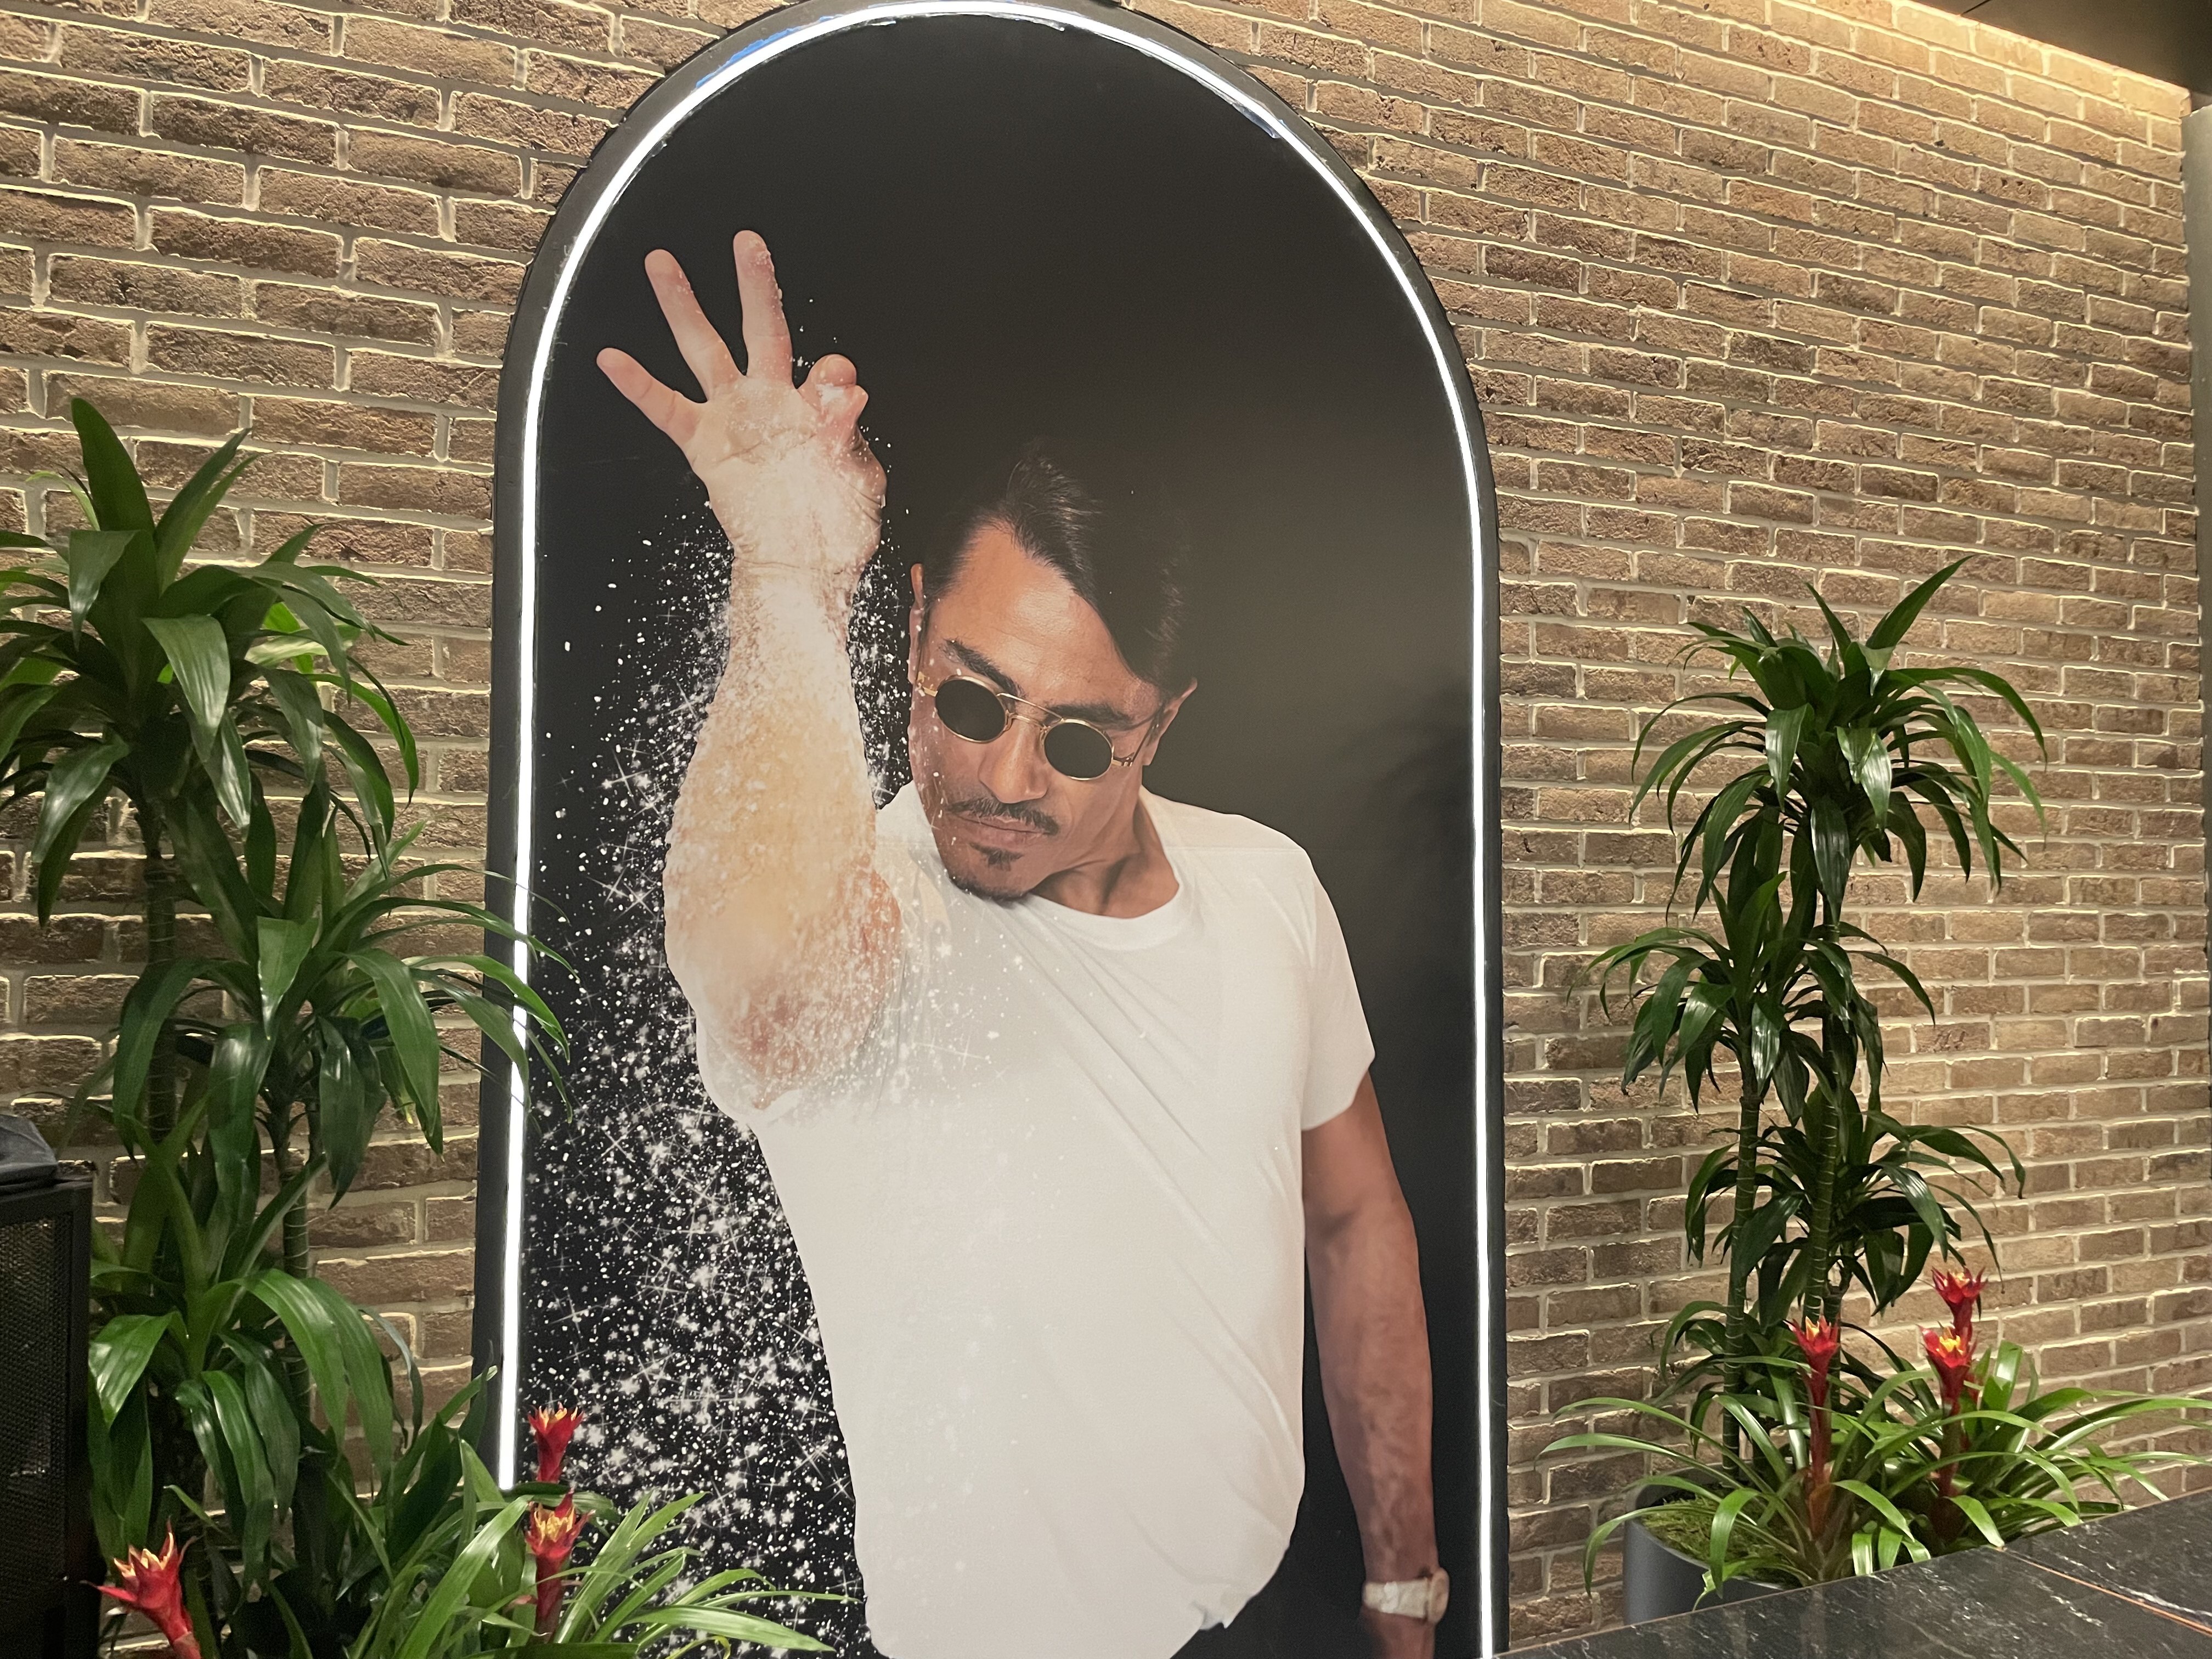 A paintig of Salt Bae hung on a brick wall inside Nusr-et’s latest steakhouse opening in NYC.